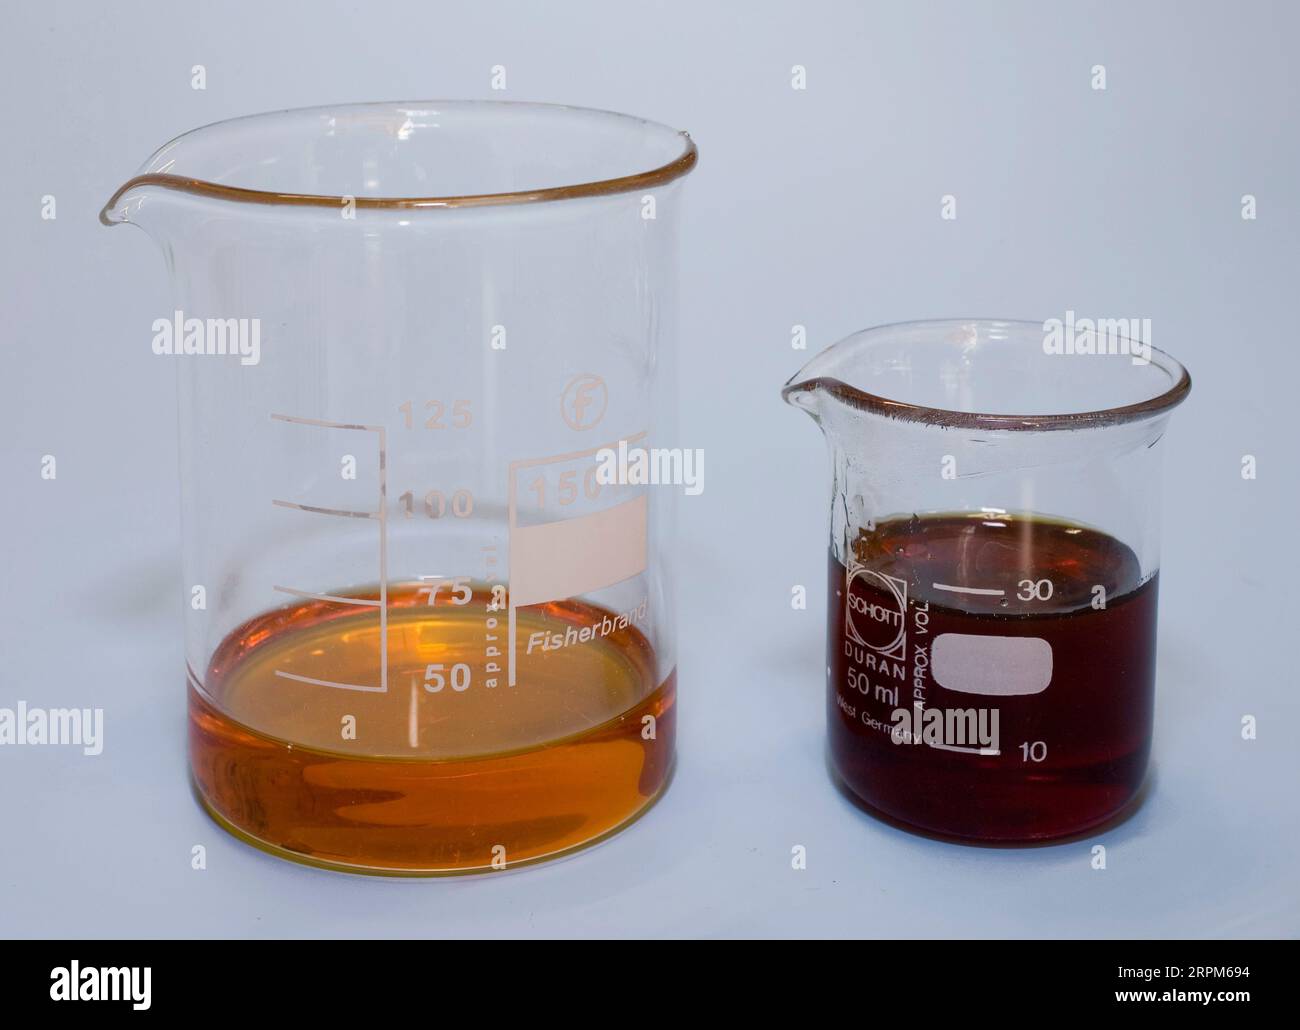 https://c8.alamy.com/comp/2RPM694/two-liquid-polymers-in-measuring-cups-added-together-gives-chemical-a-reaction-2RPM694.jpg